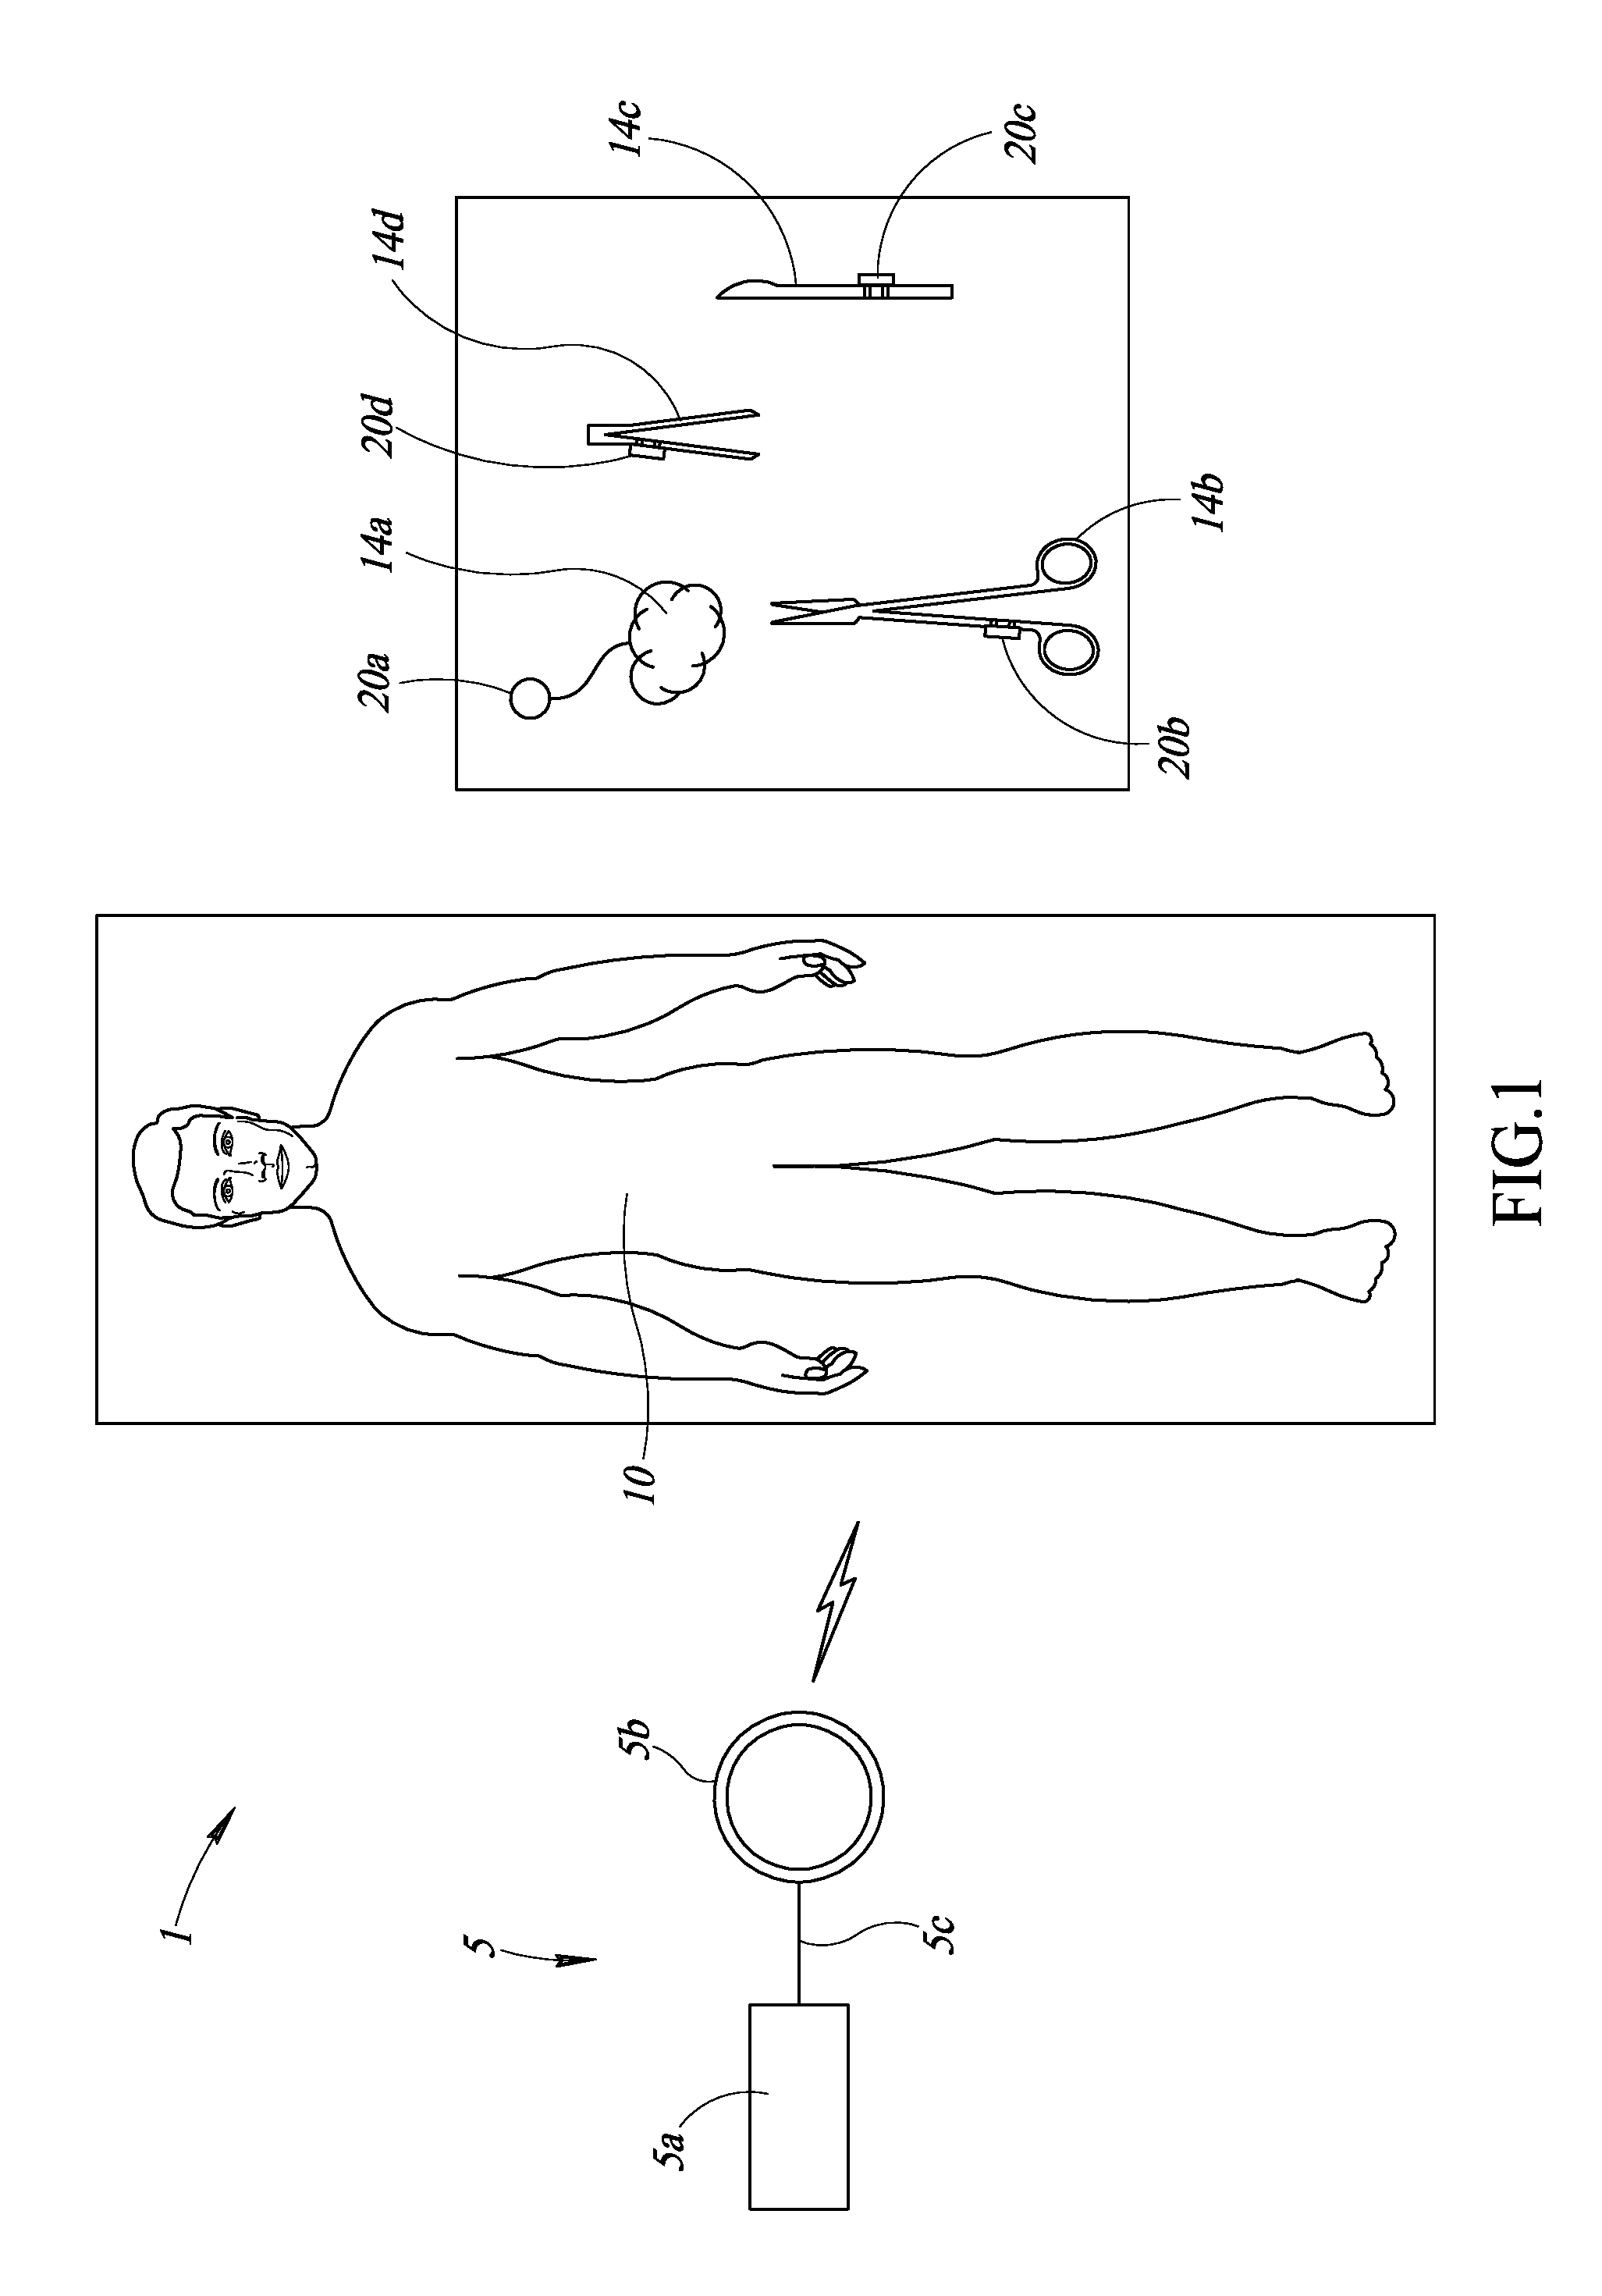 Apparatuses to physically couple transponder to objects, such as surgical objects, and methods of using same